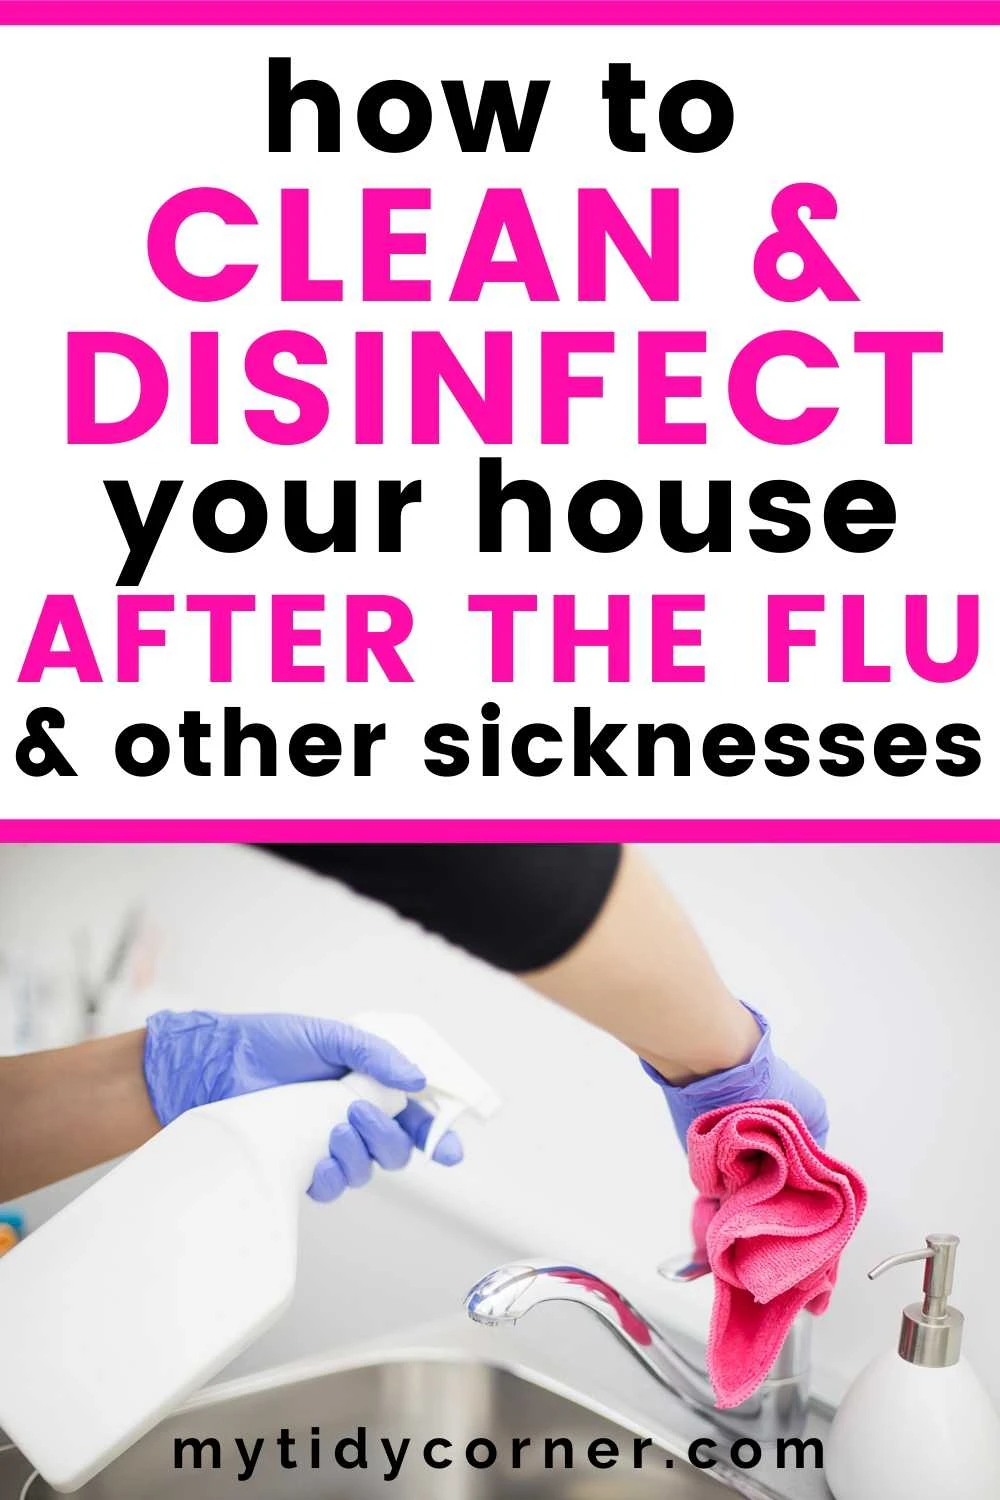 How to clean and disinfect your house after flu